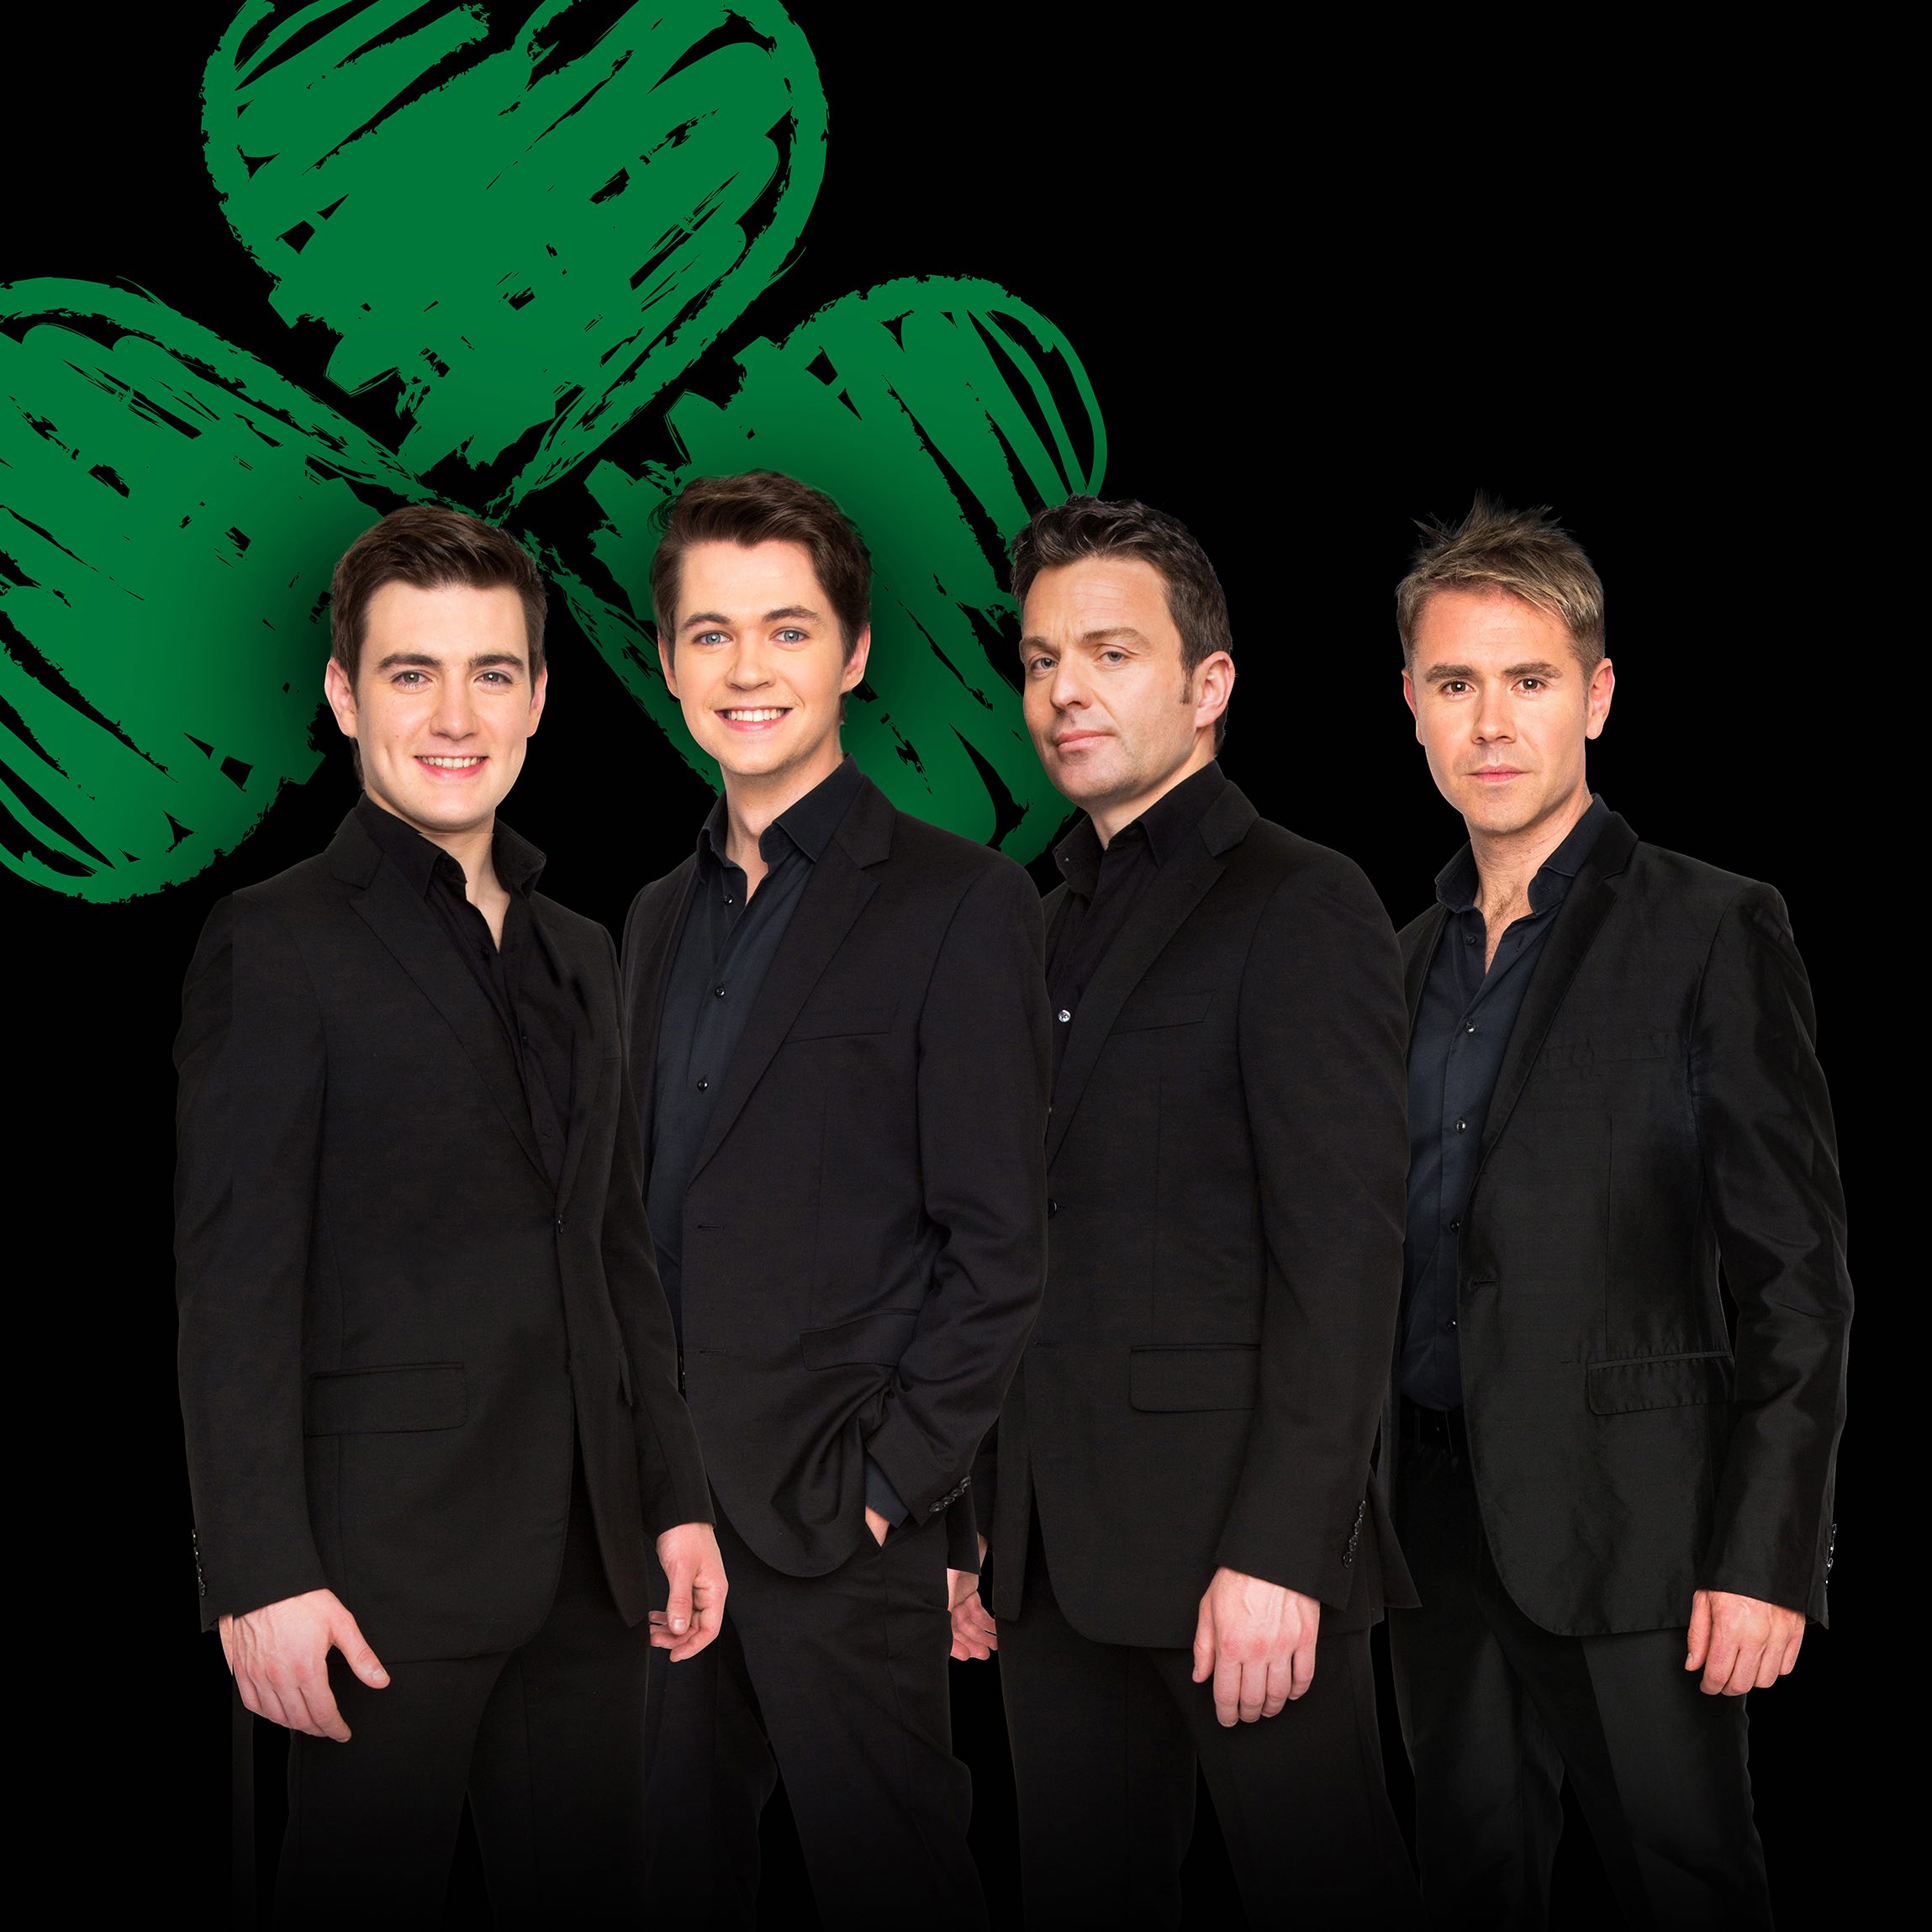 Celtic Thunder Mar 16, 2021 Tickets 15 USD (150 StageIt Notes) ST PATRICK'S WEEK WITH